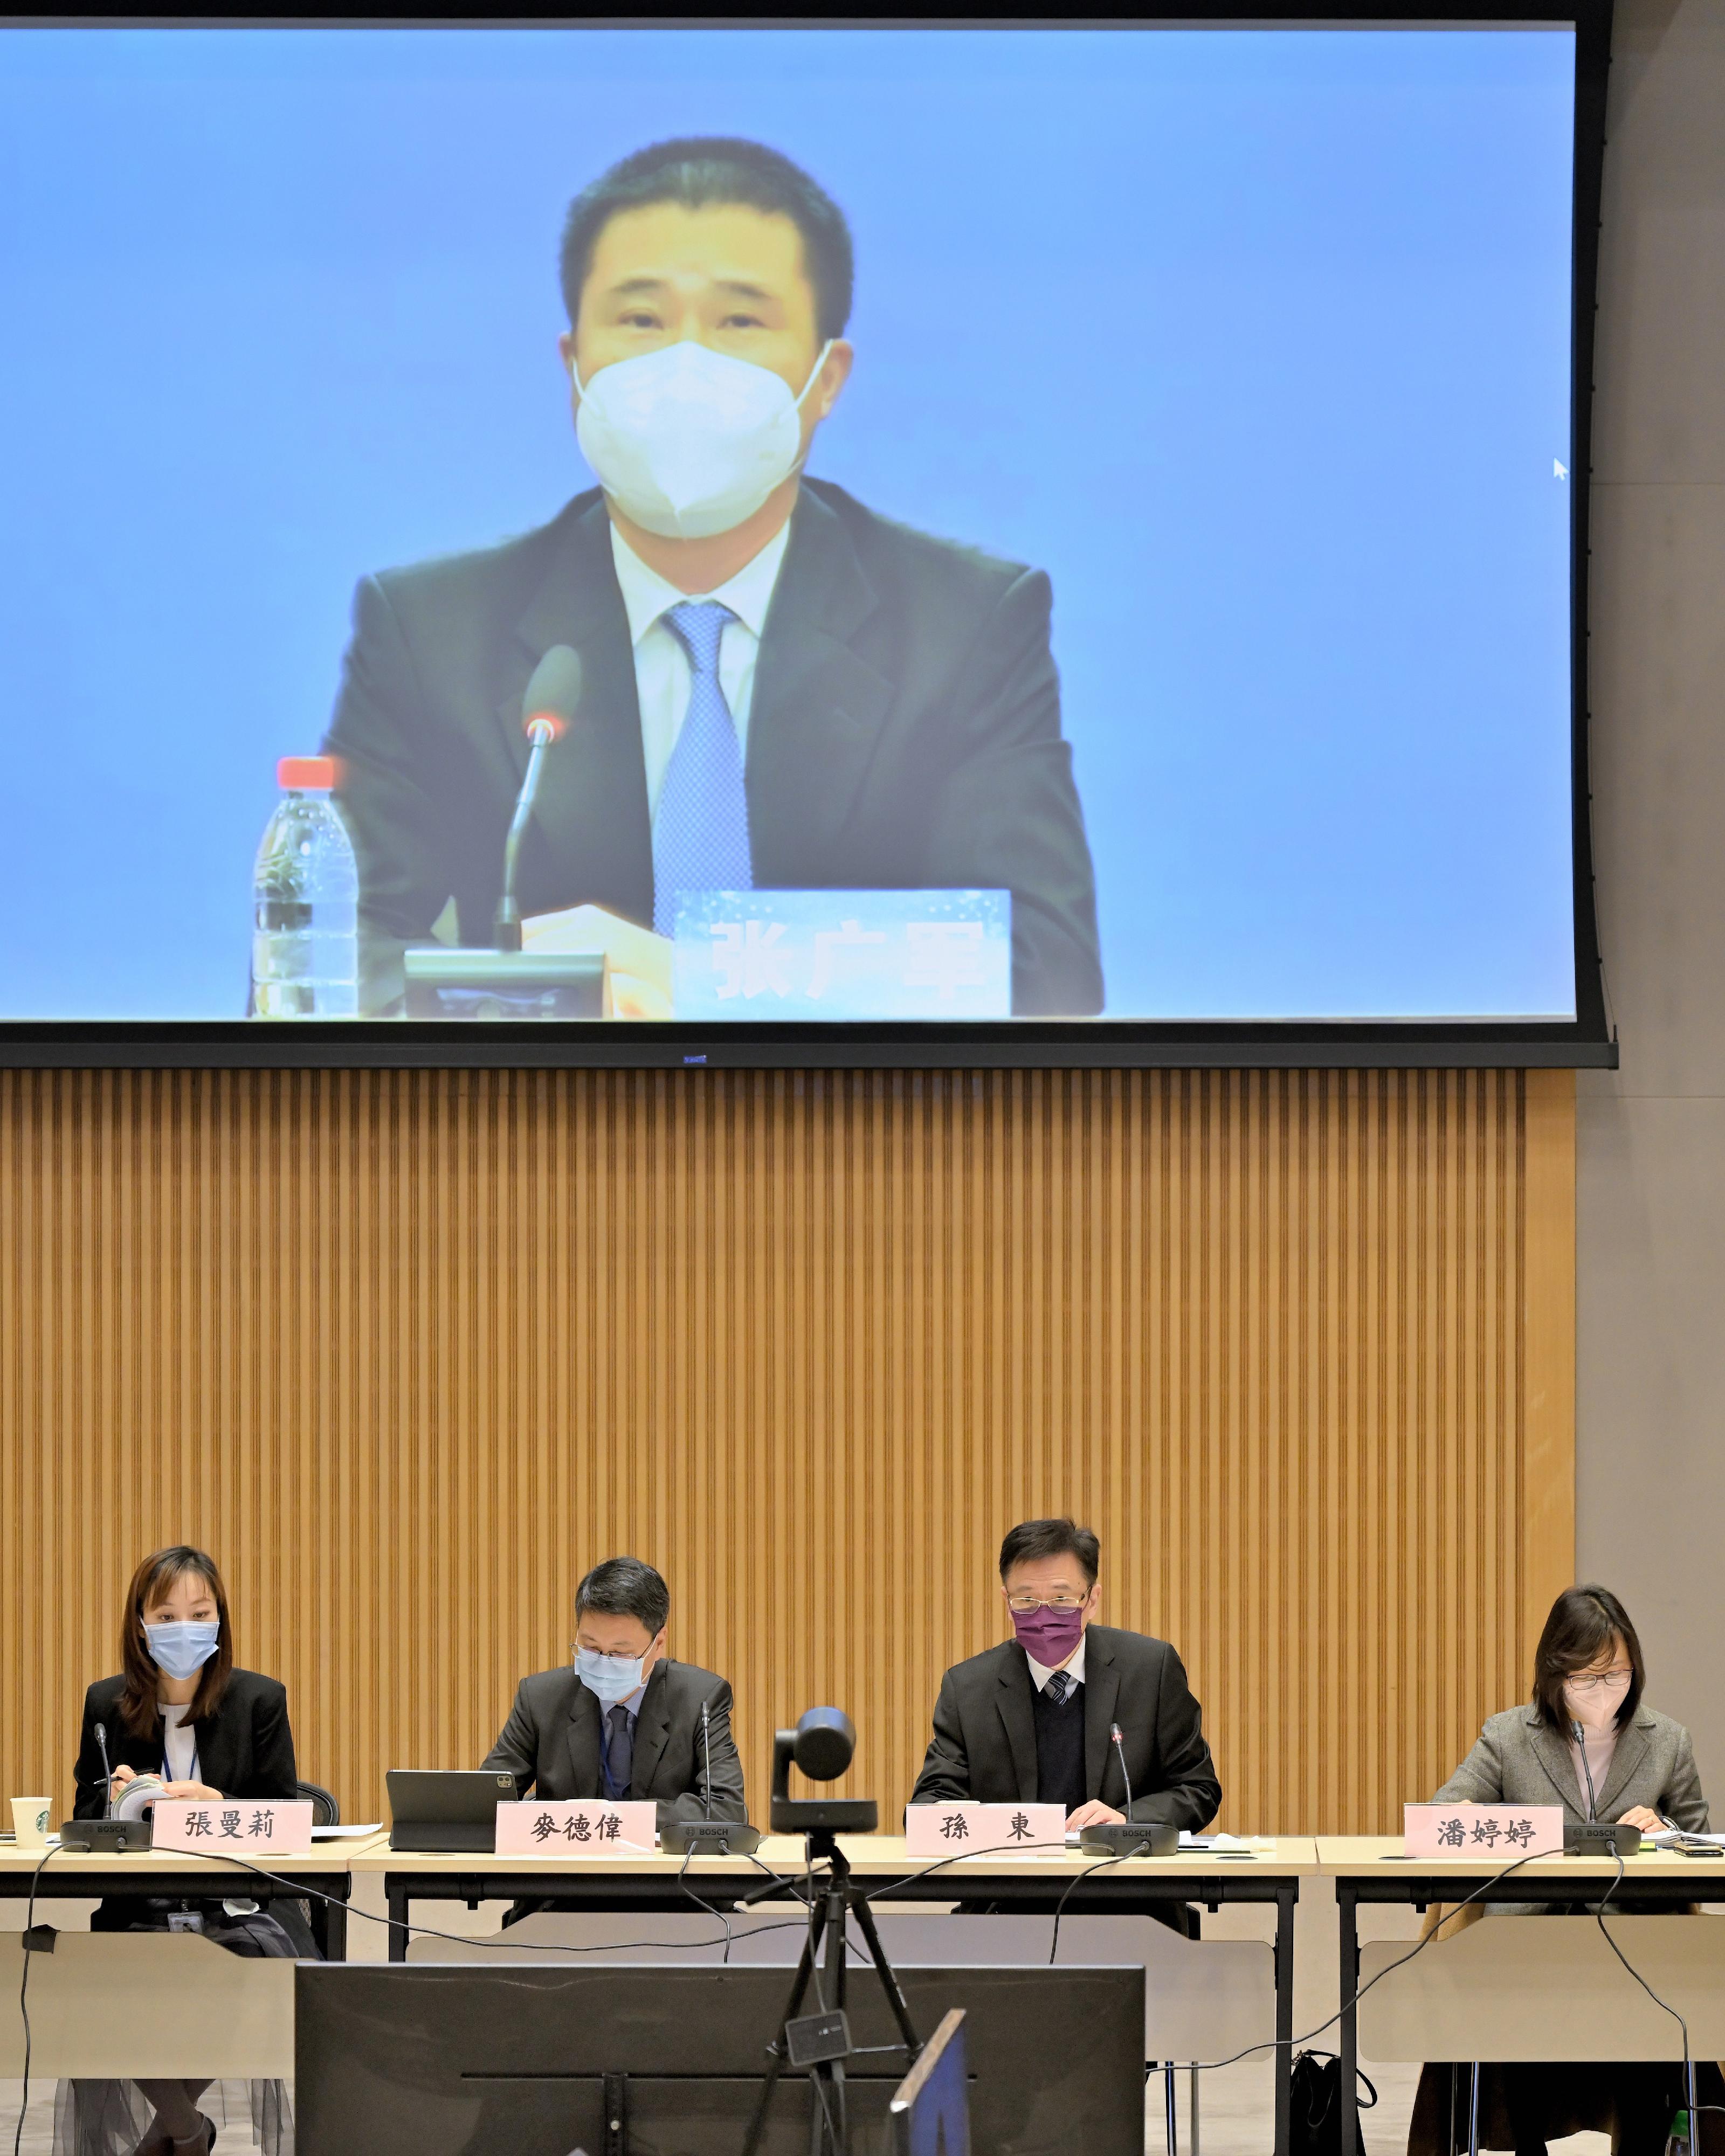 The Secretary for Innovation, Technology and Industry, Professor Sun Dong (second right), and Vice Minister of Science and Technology Professor Zhang Guangjun (on screen), co-chair the 16th meeting of the Mainland/Hong Kong Science and Technology Co-operation Committee via video conferencing today (December 16). Also joining the meeting are the Permanent Secretary for Innovation, Technology and Industry, Mr Eddie Mak (second left); the Under Secretary for Innovation, Technology and Industry, Ms Lillian Cheong (first left); and the Commissioner for Innovation and Technology, Ms Rebecca Pun (first right).